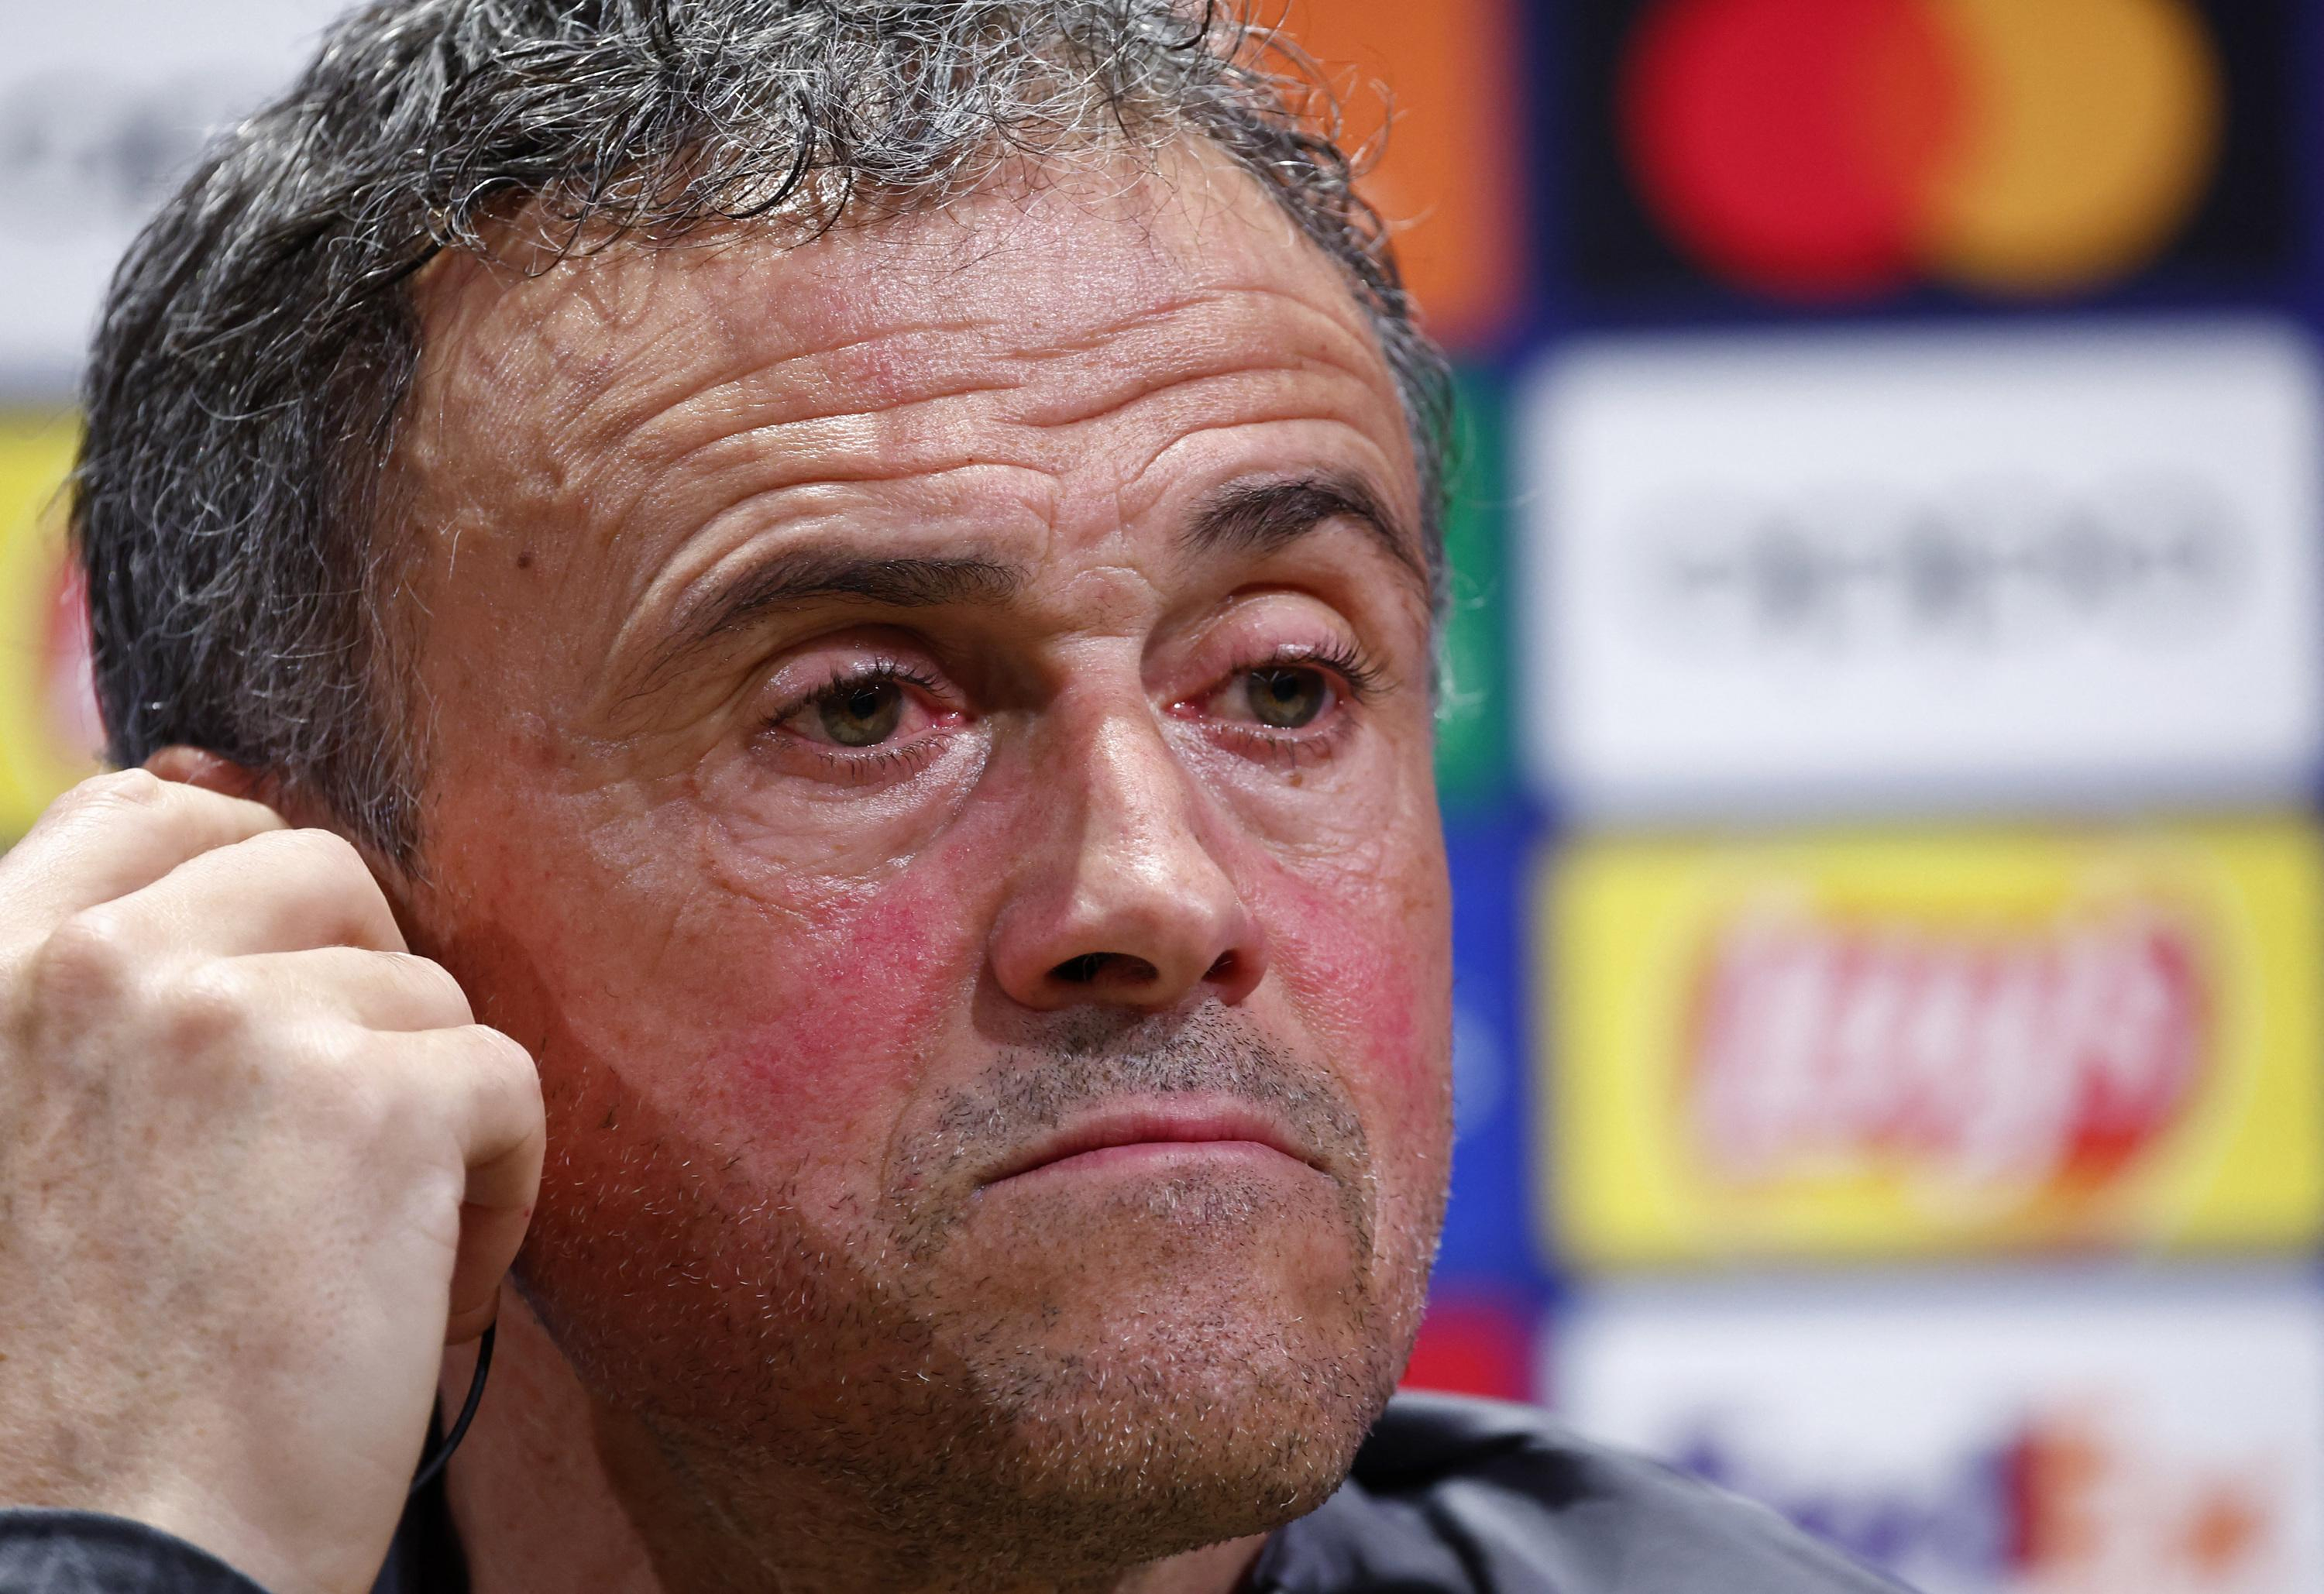 Luis Enrique before PSG-Real Sociedad: “We are in a learning process but we are ready”